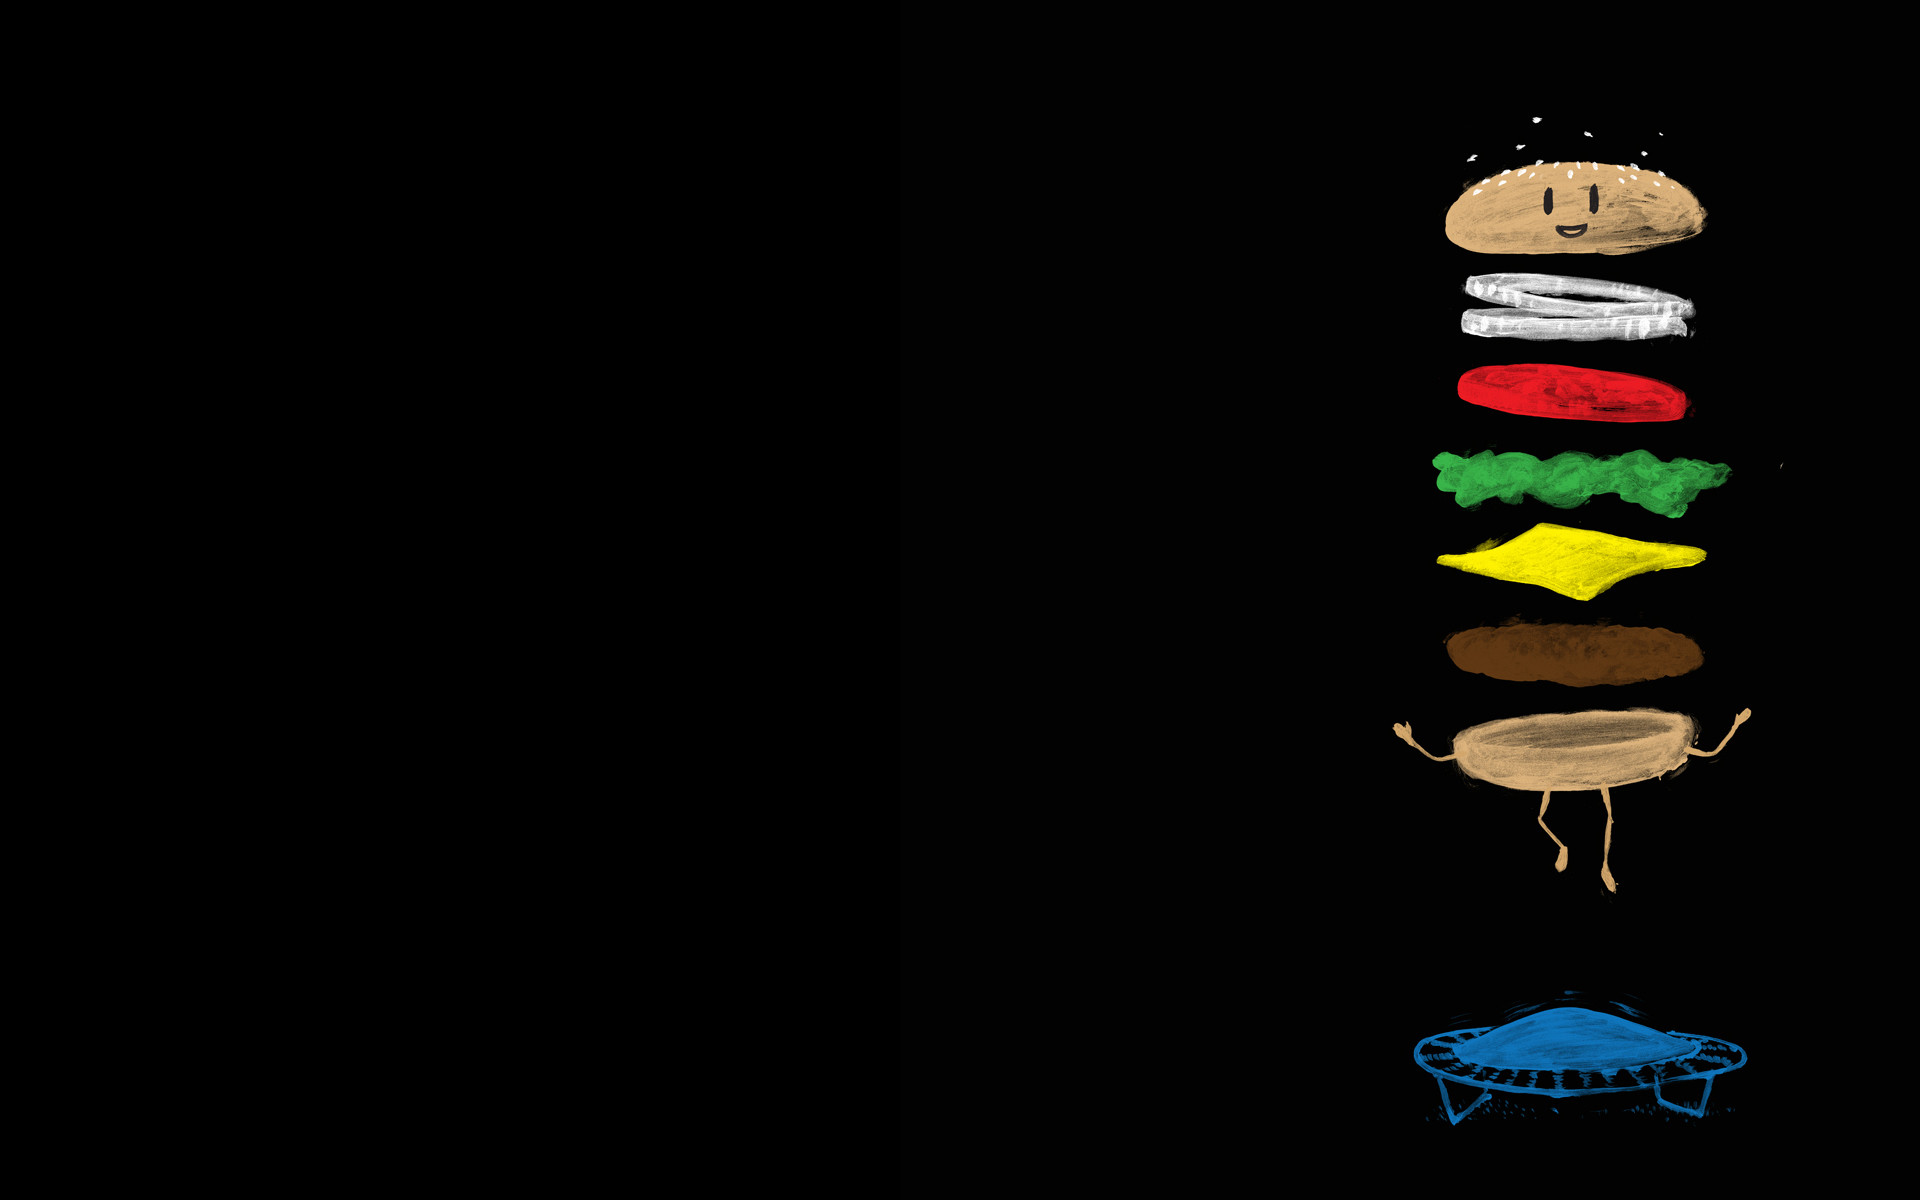 Jumping Hamburger Backgrounds for Powerpoint Presentations, Jumping